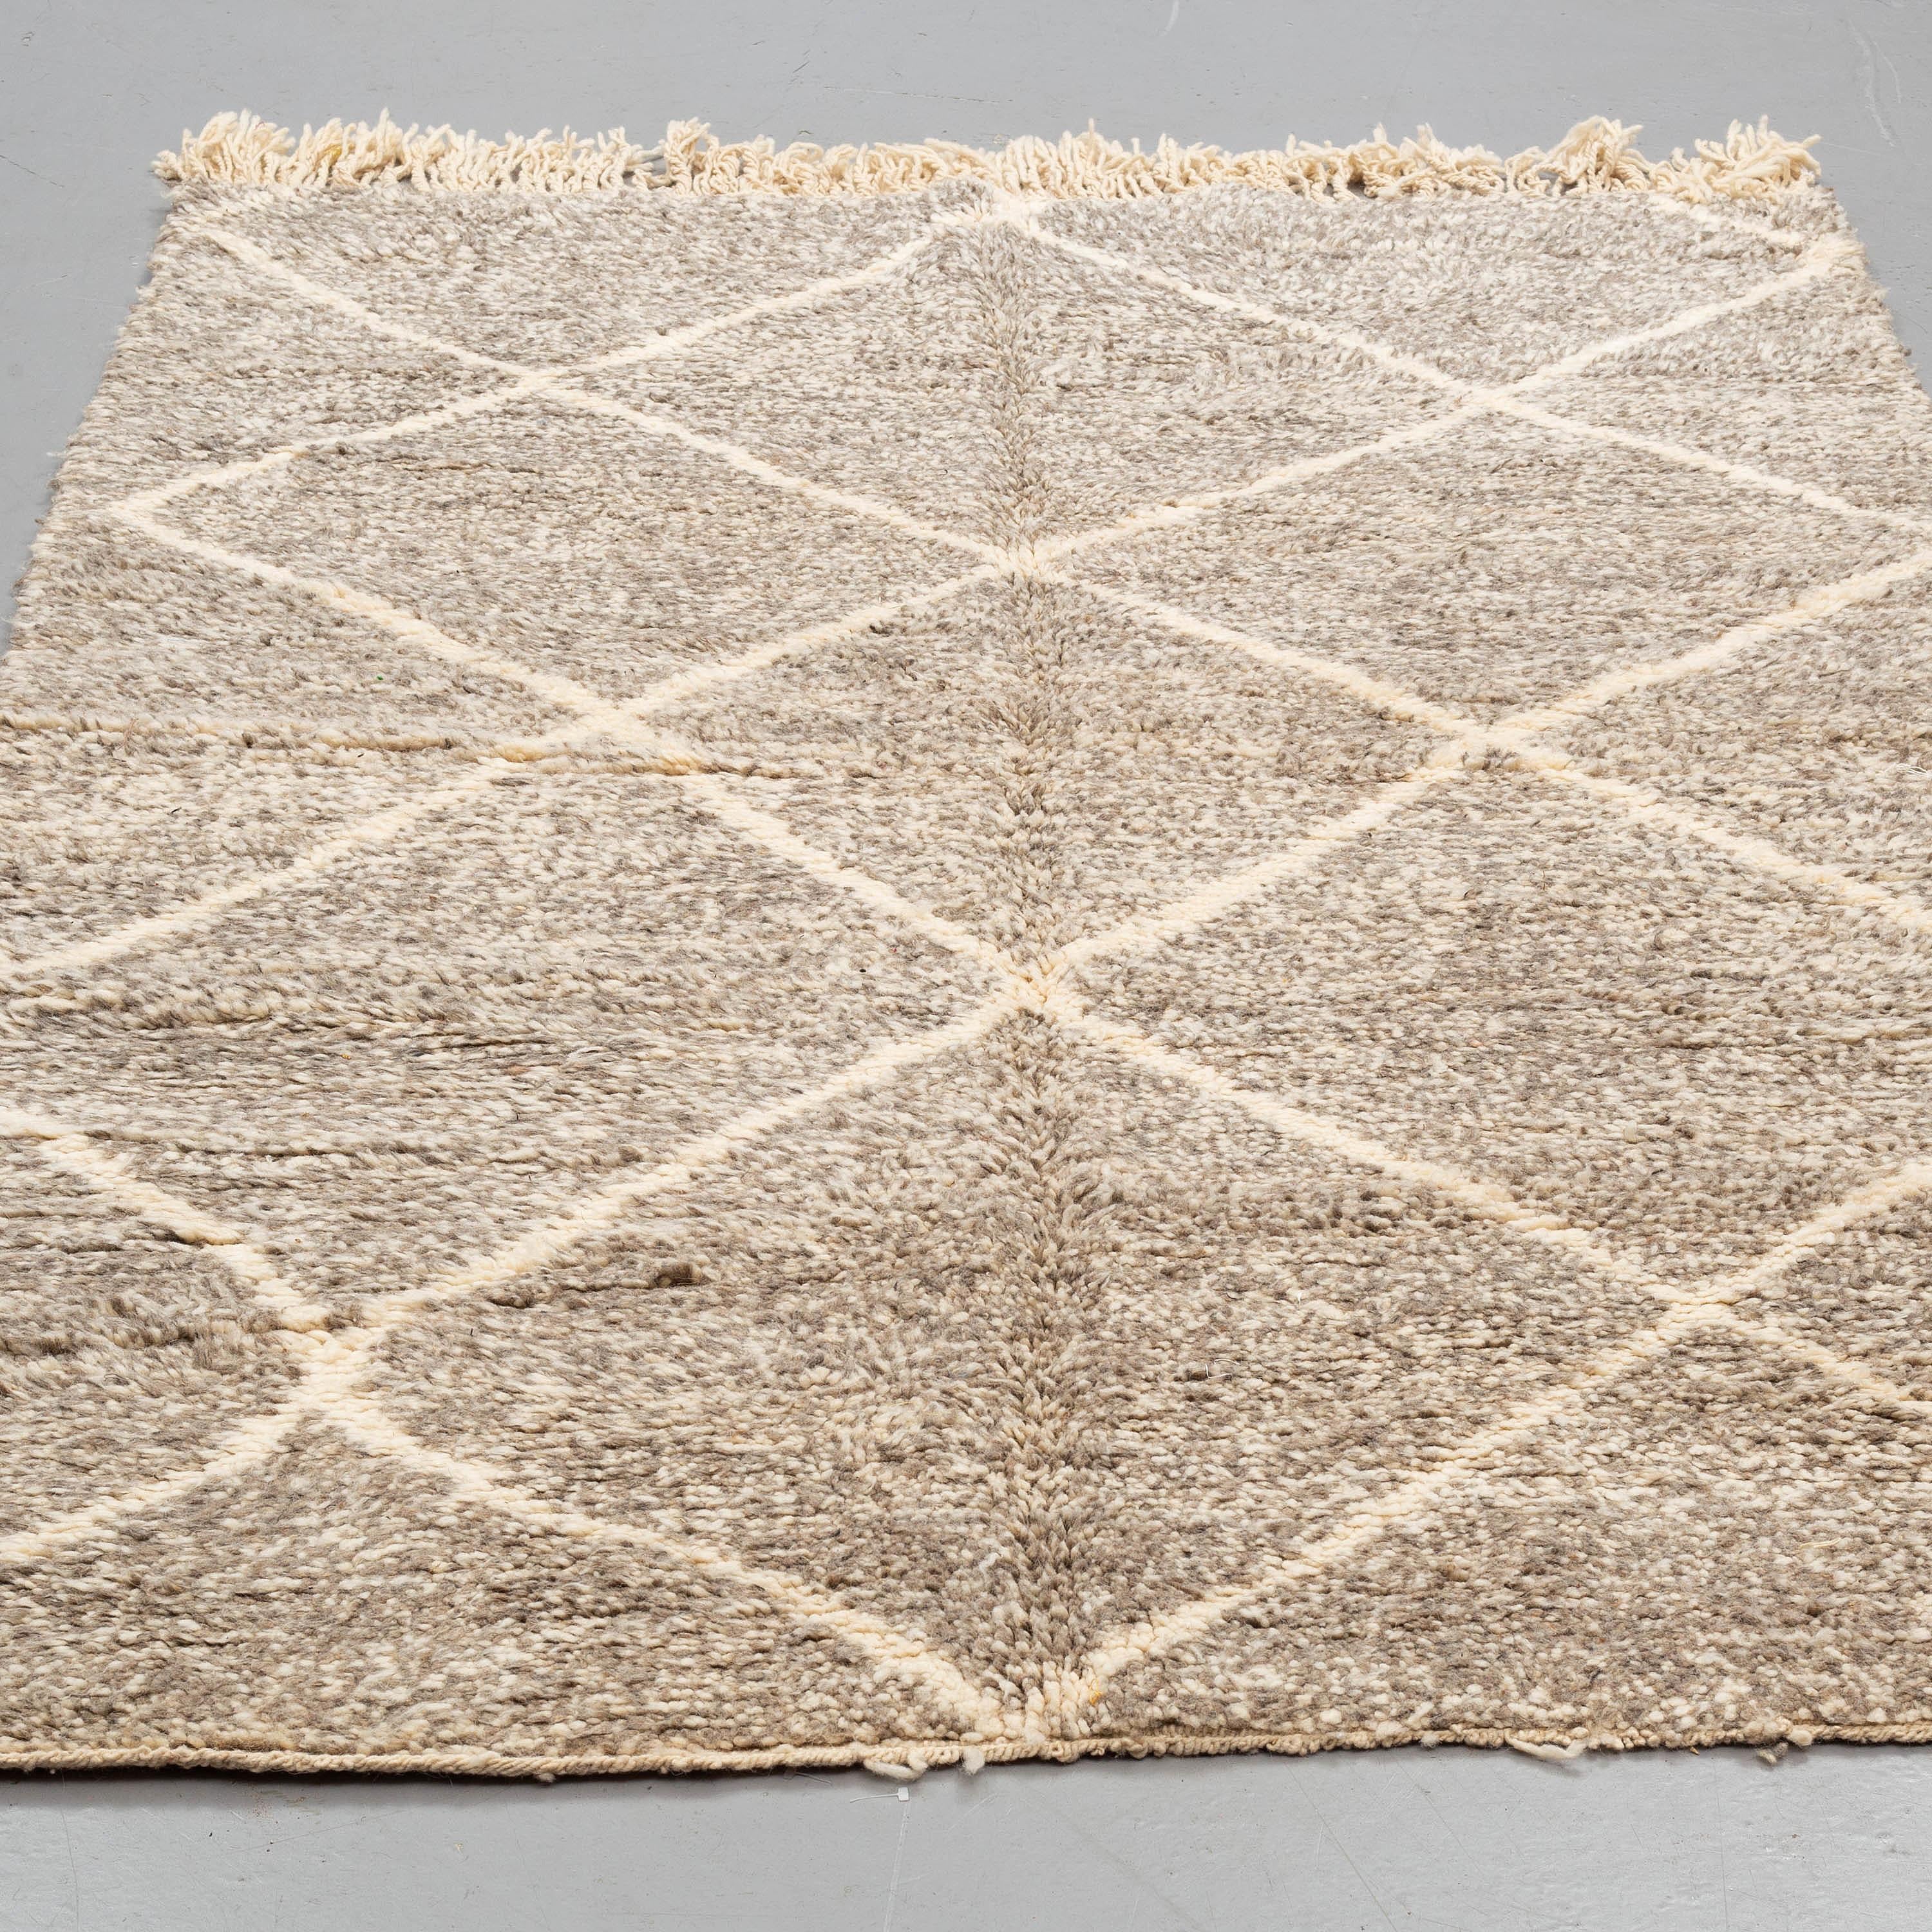 Moroccan wool rug. Insignificant wear.

